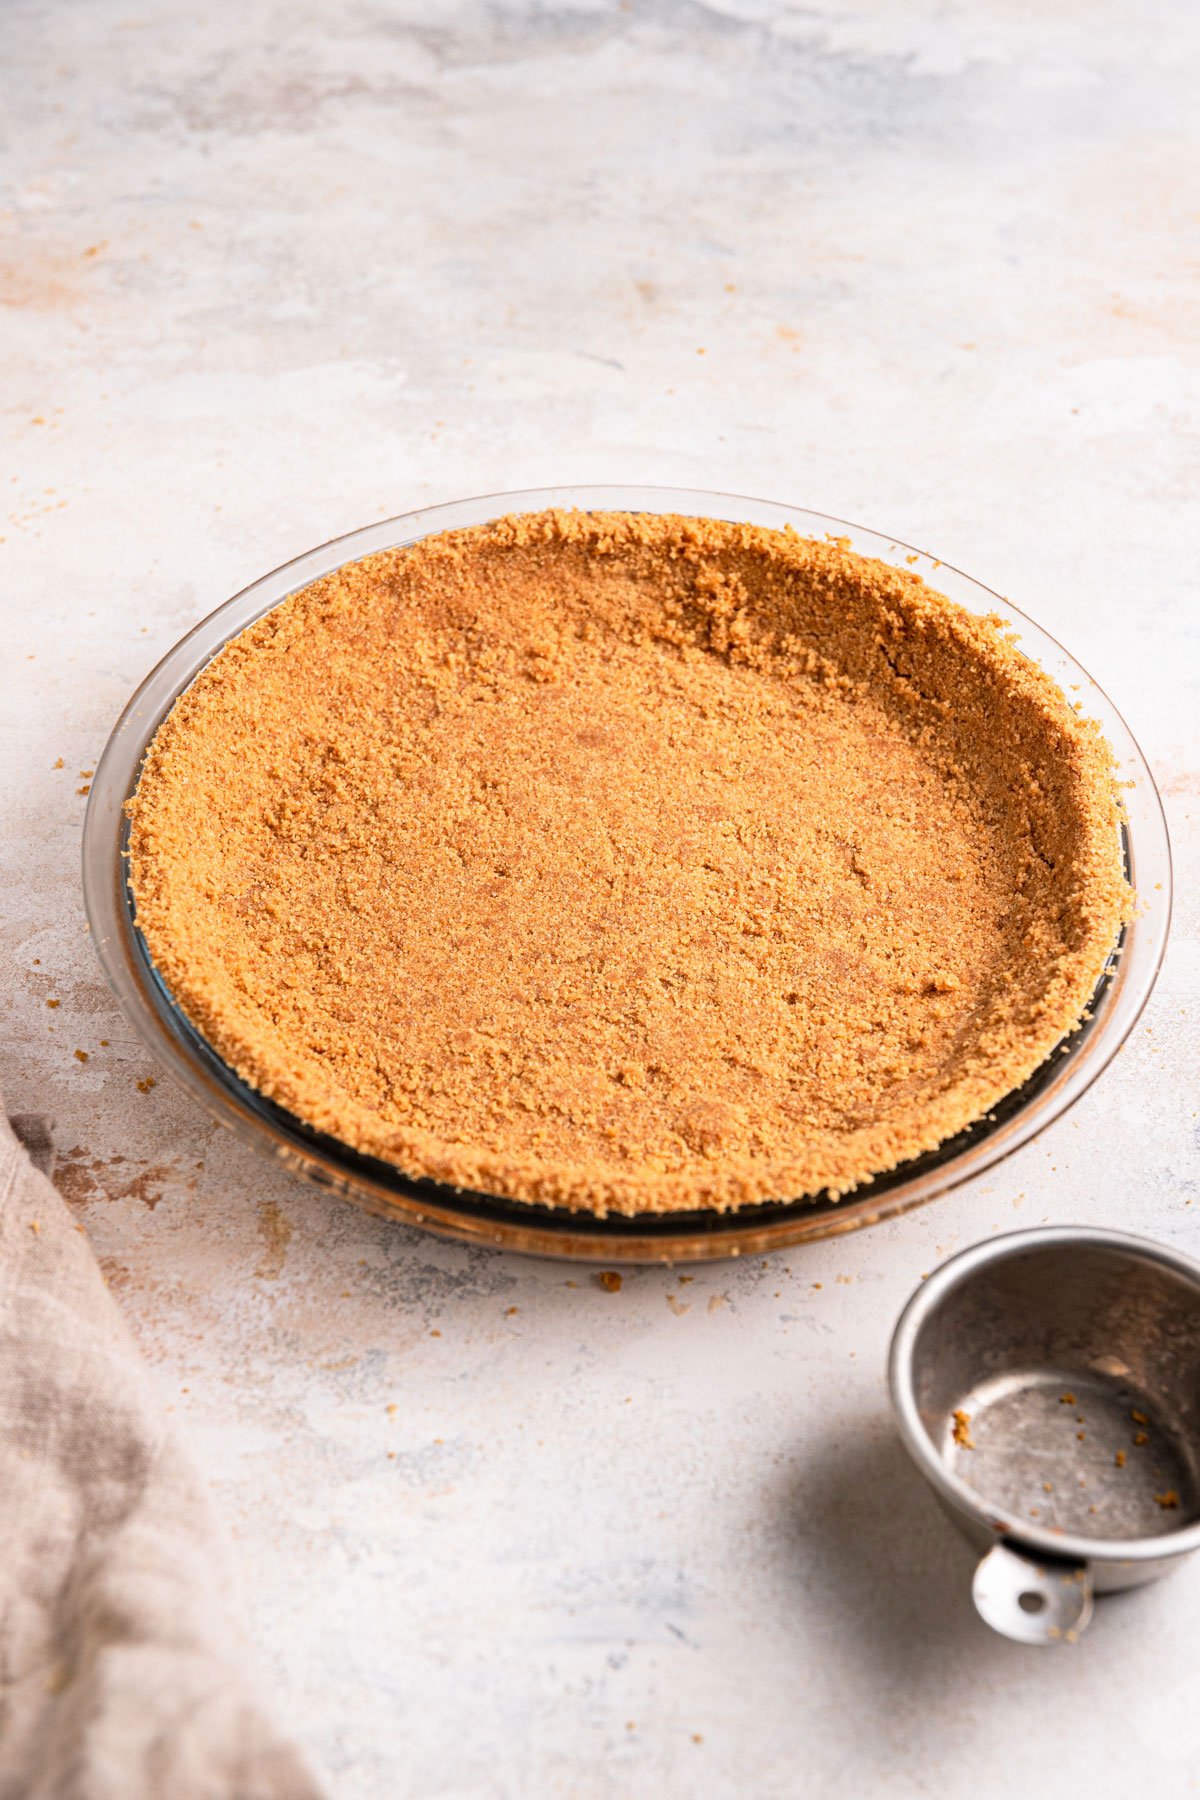 Graham cracker crust pressed into a glass pie plate.